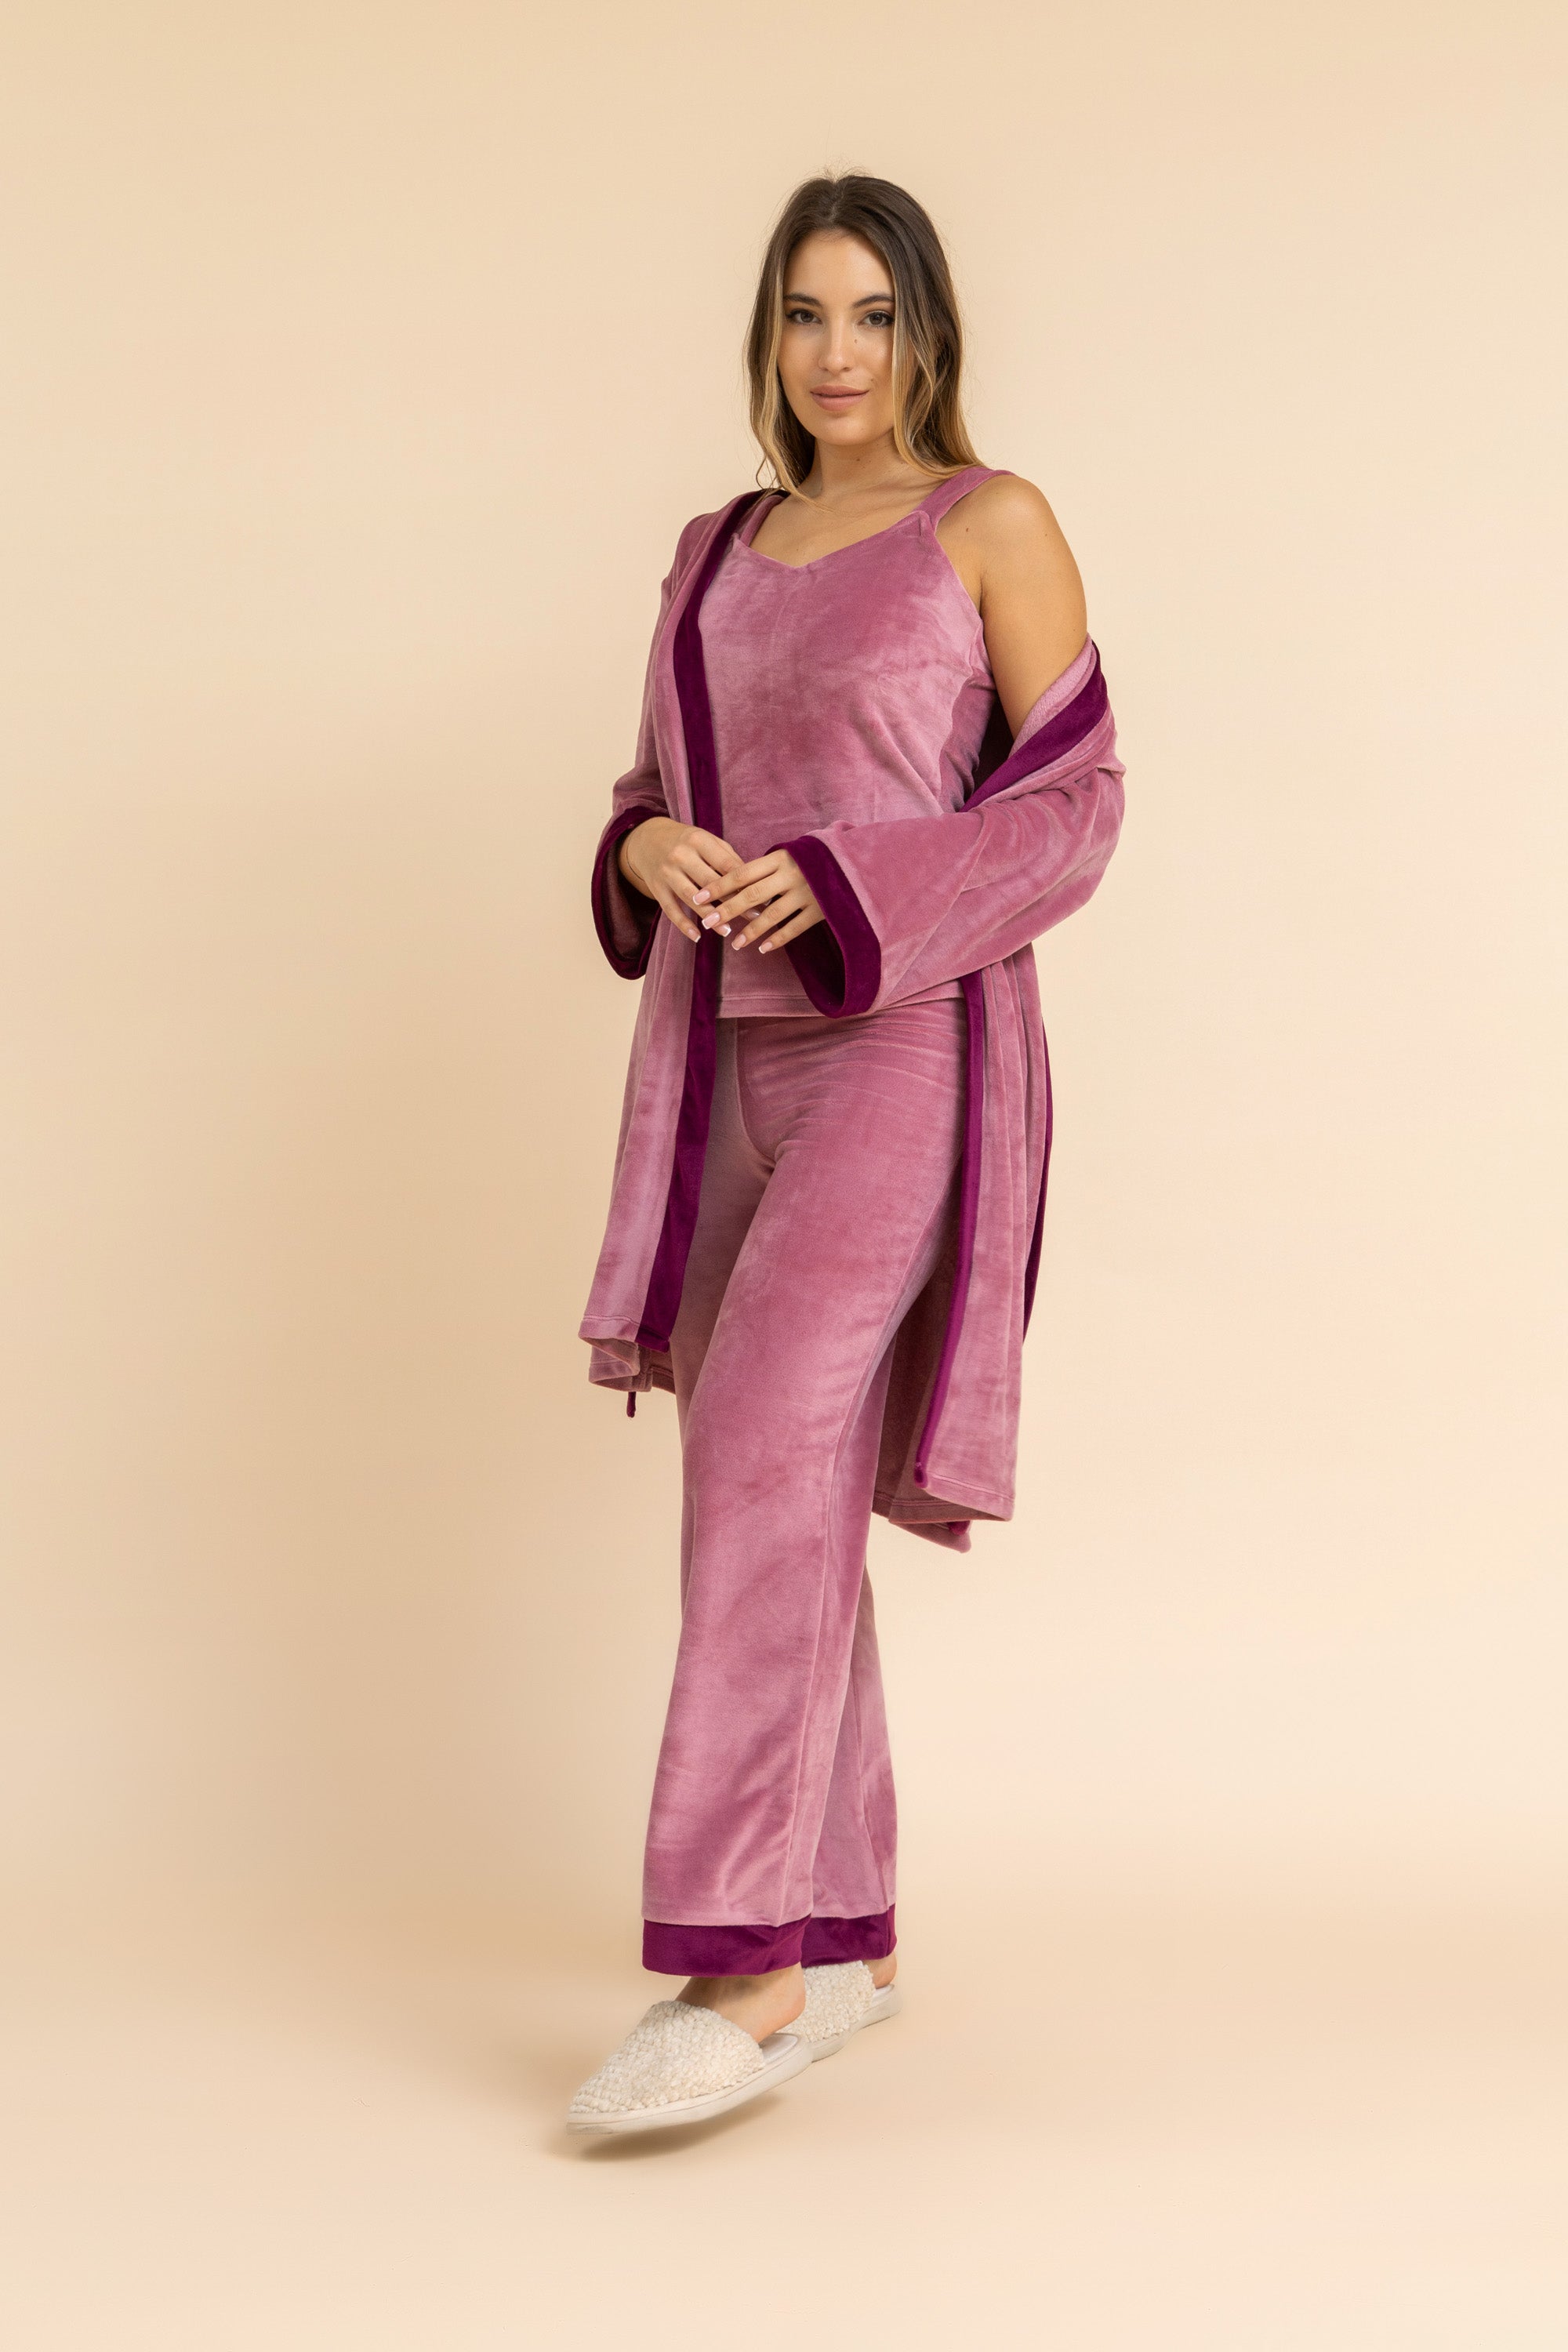 3 Pcs Velvet set - with matching Cami top, Pants and mid length Robe